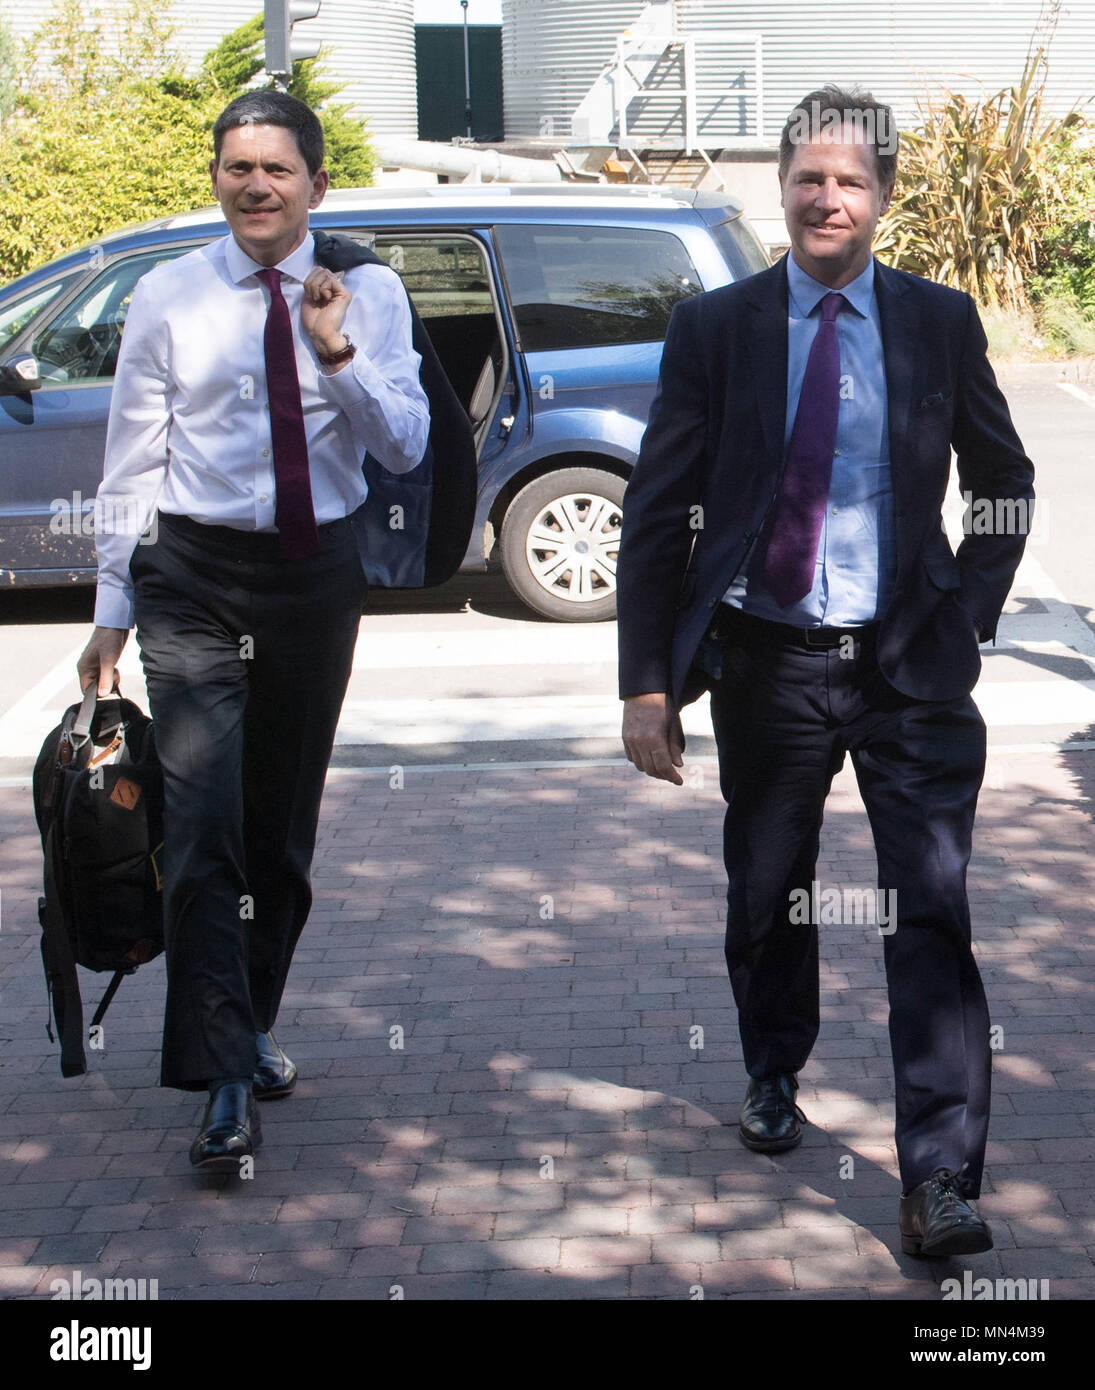 Liberal Democrat former deputy PM Sir Nick Clegg (right) Labour former foreign secretary David Miliband arrive to speak at a cross-party intervention Brexit negotiation at Tilda Rice Mill in Rainham, Essex. Stock Photo